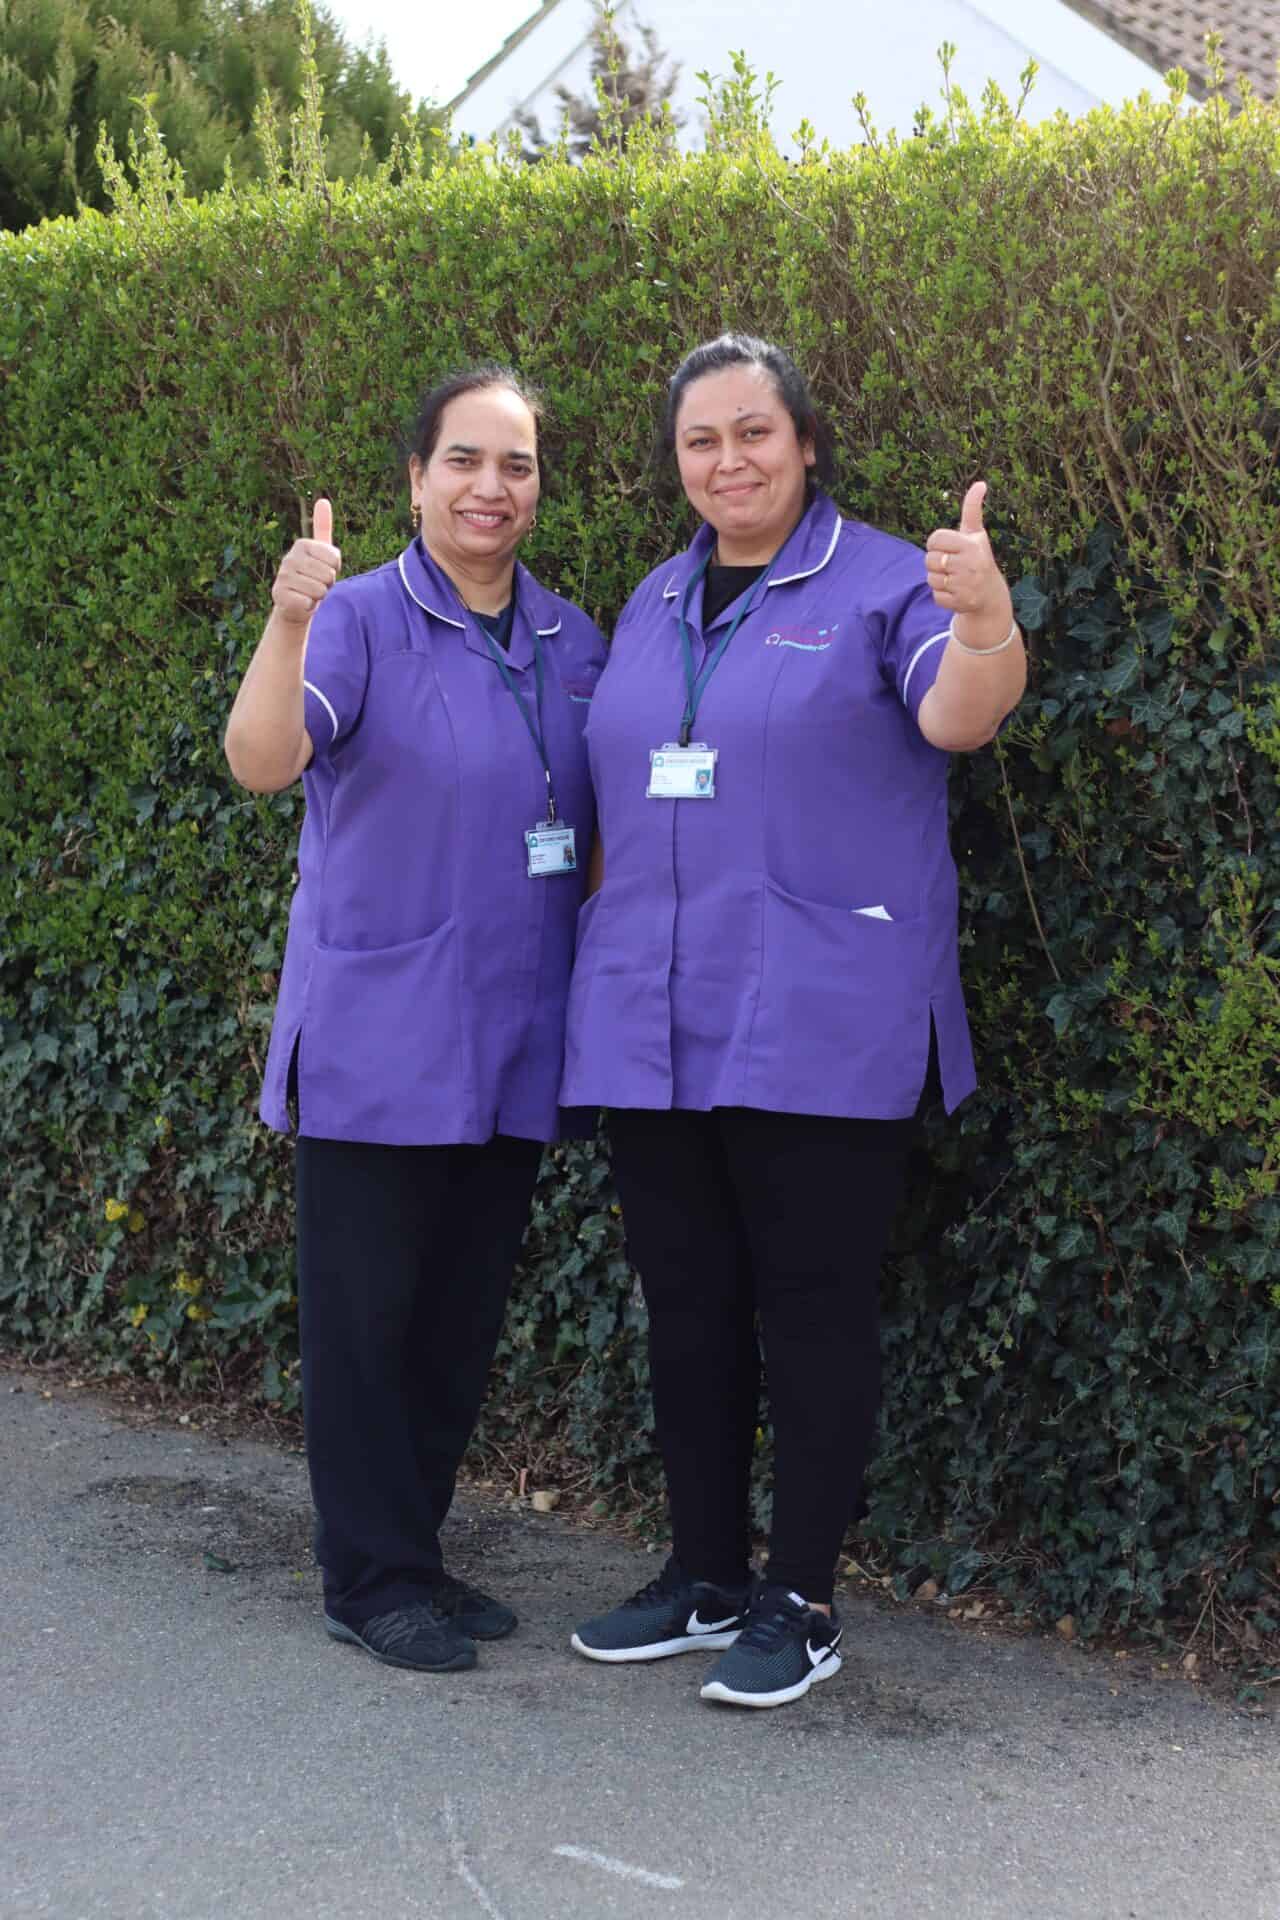 Two smiling healthcare professionals in purple scrubs giving a thumbs-up outside.